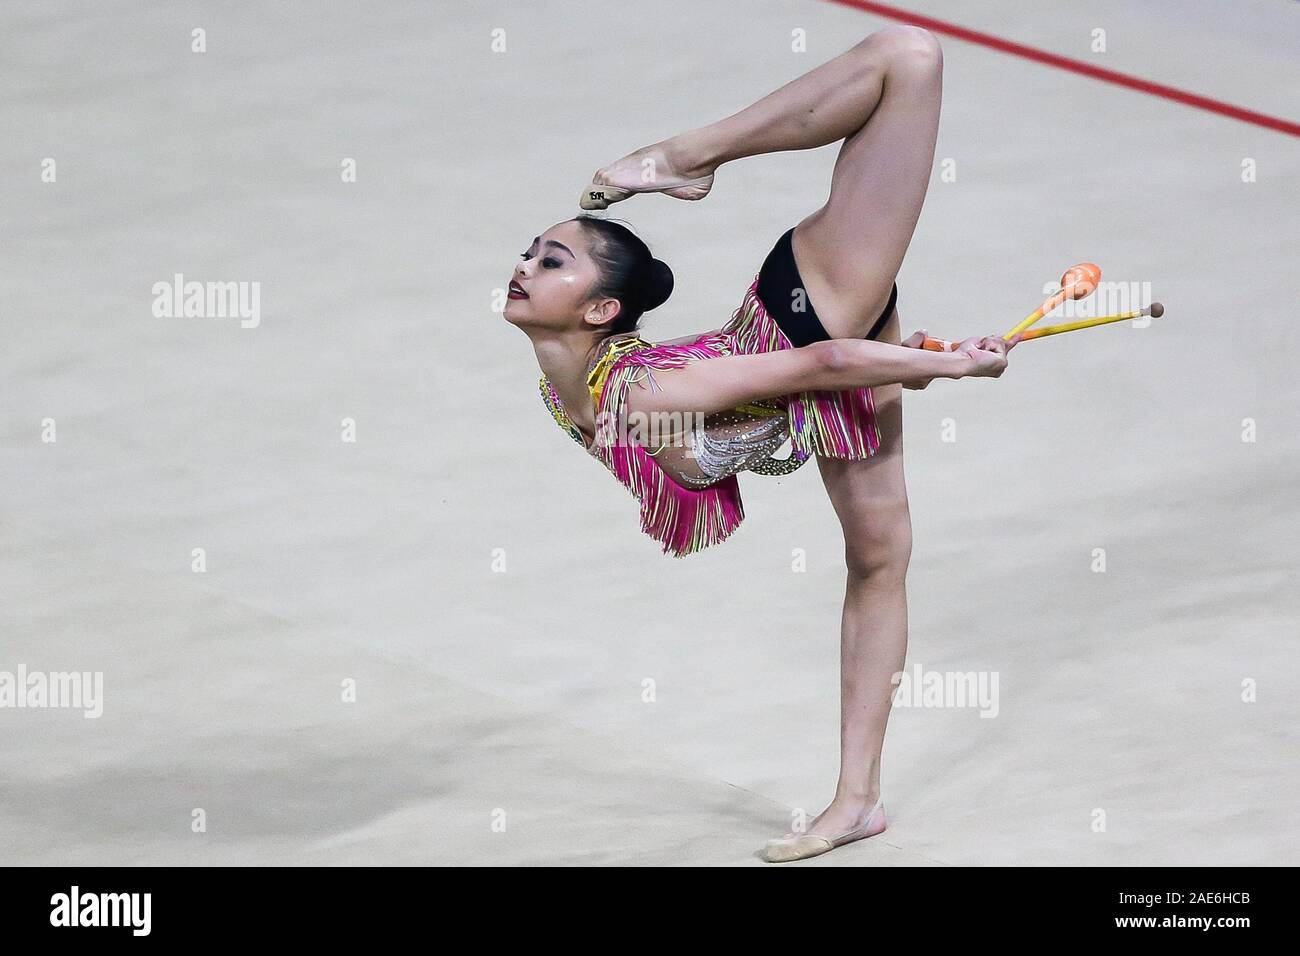 Pasay City, Philippines. 7th Dec, 2019. Izzah Amzan of Malaysia performs  during the women's rhythmic gymnastics clubs finals at the SEA Games 2019  in Manila, the Philippines, Dec. 7, 2019. Credit: Rouelle